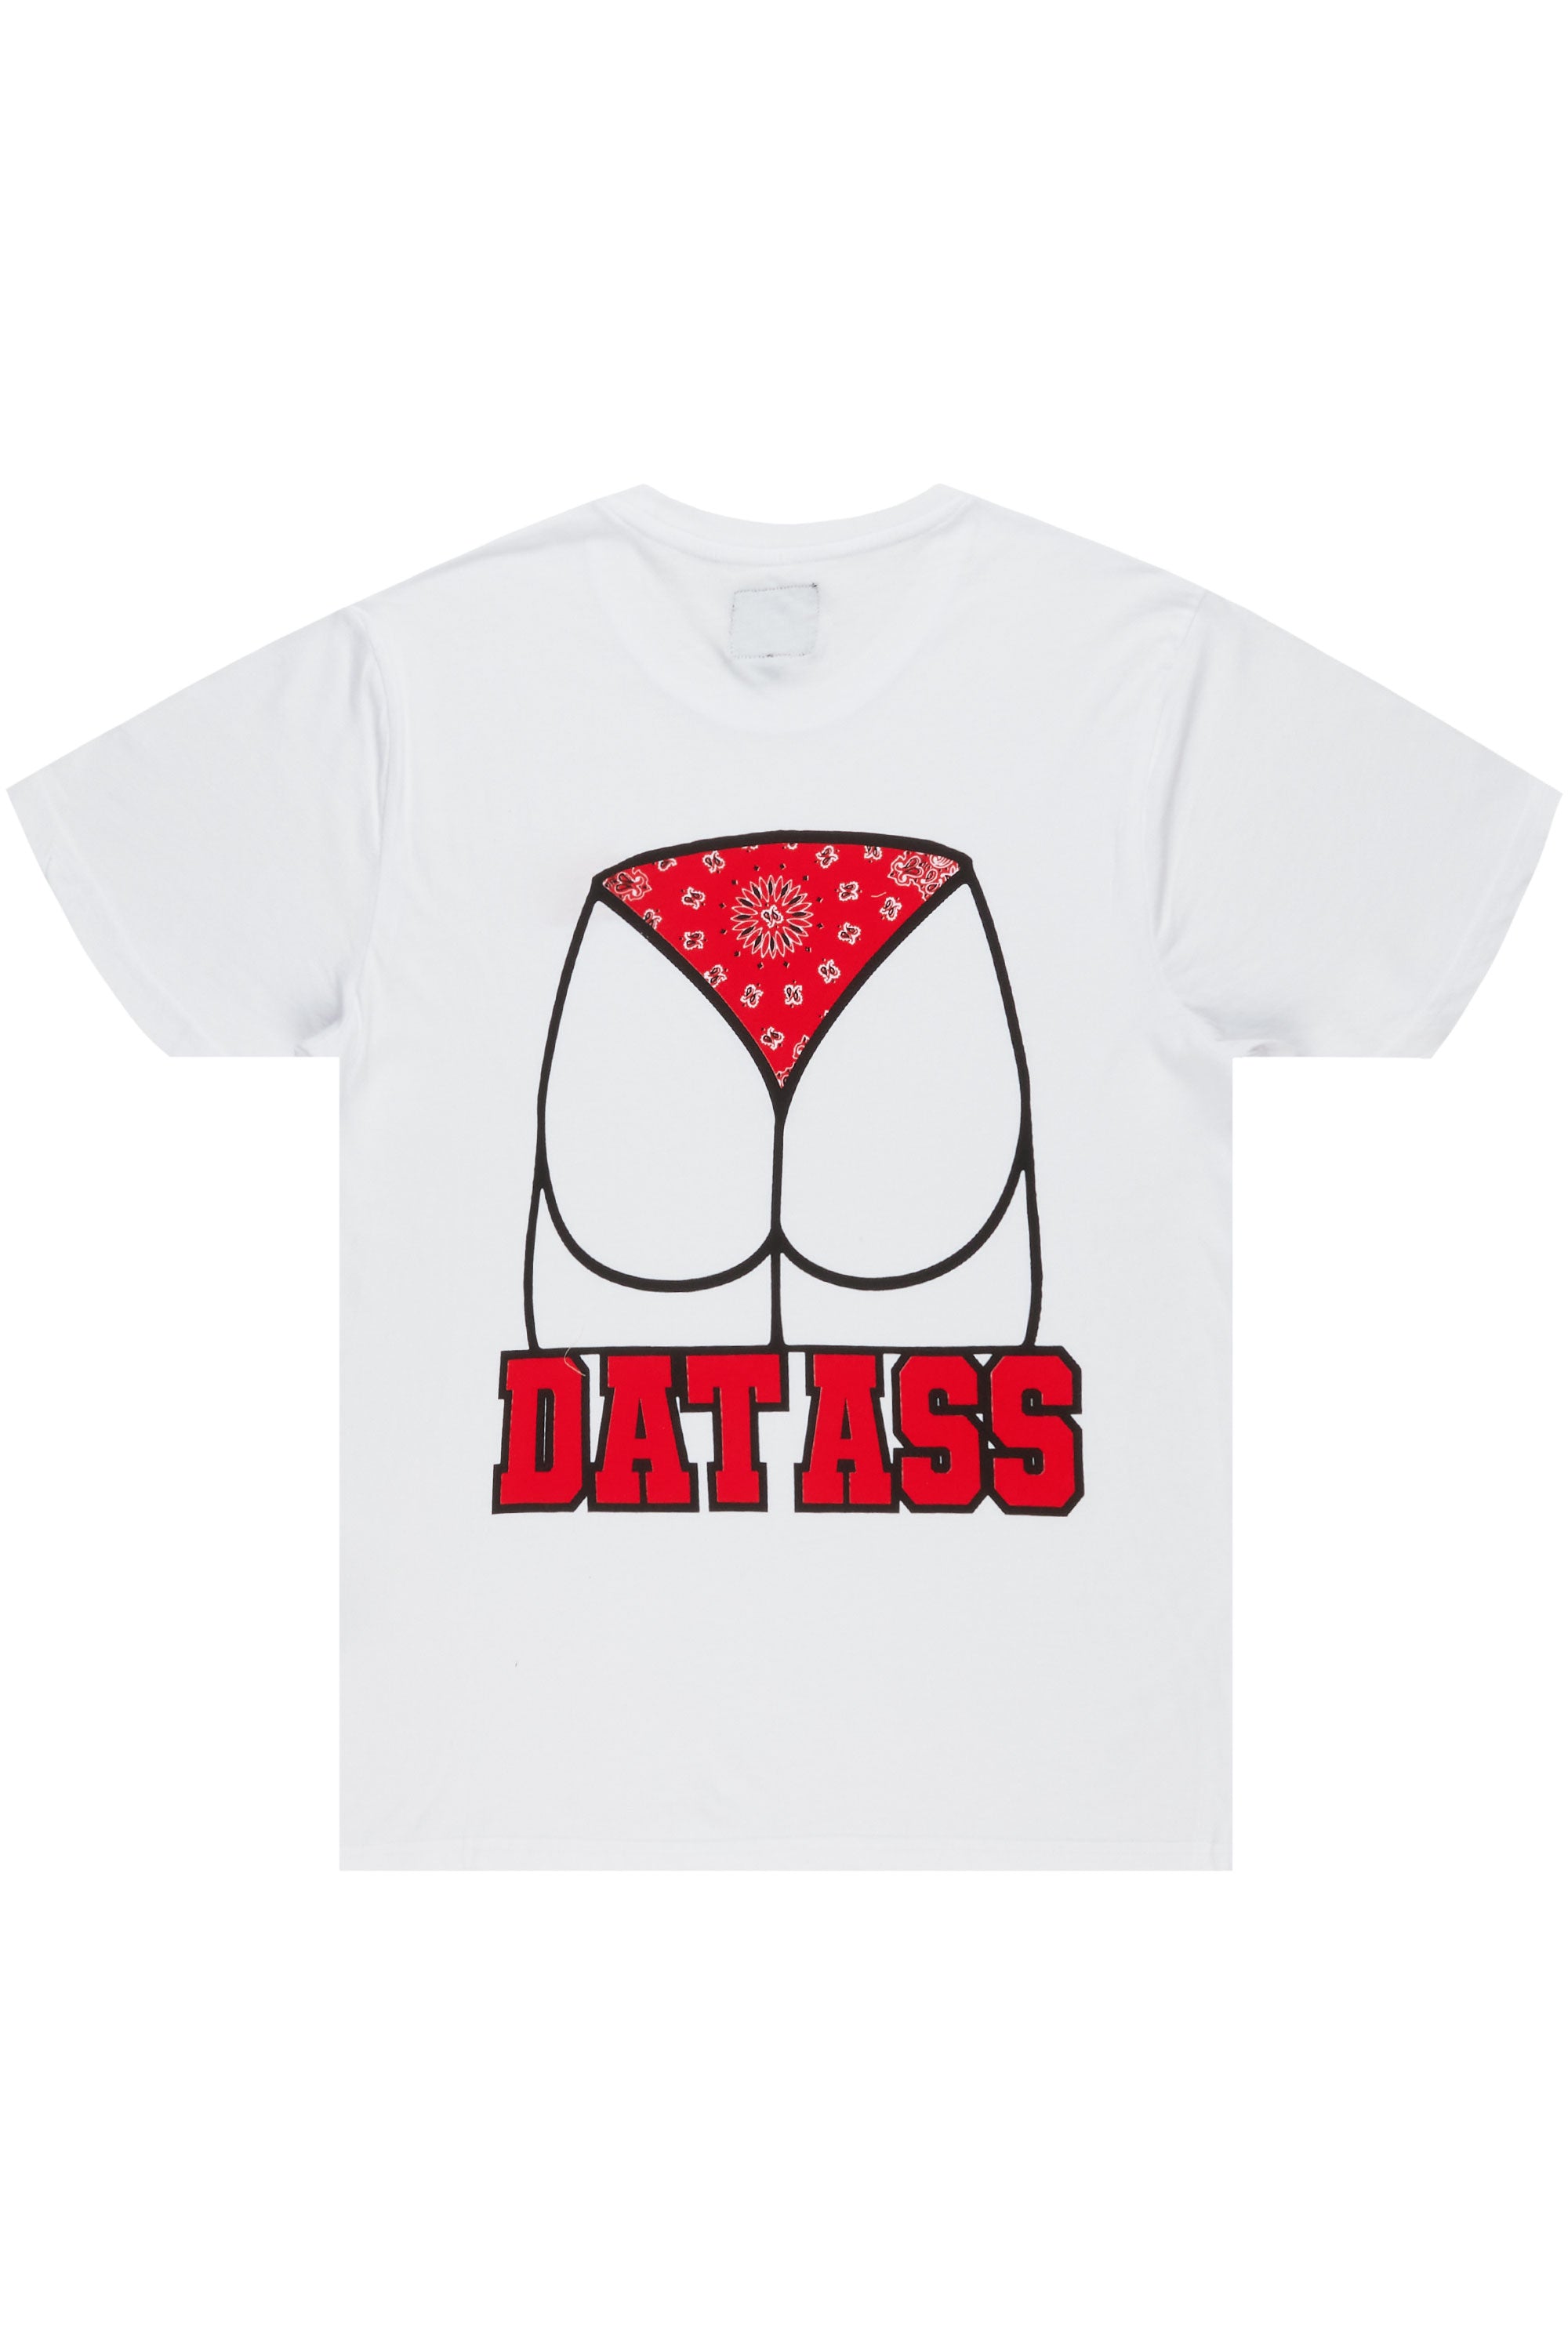 Jayliss White/Red Graphic T-Shirt